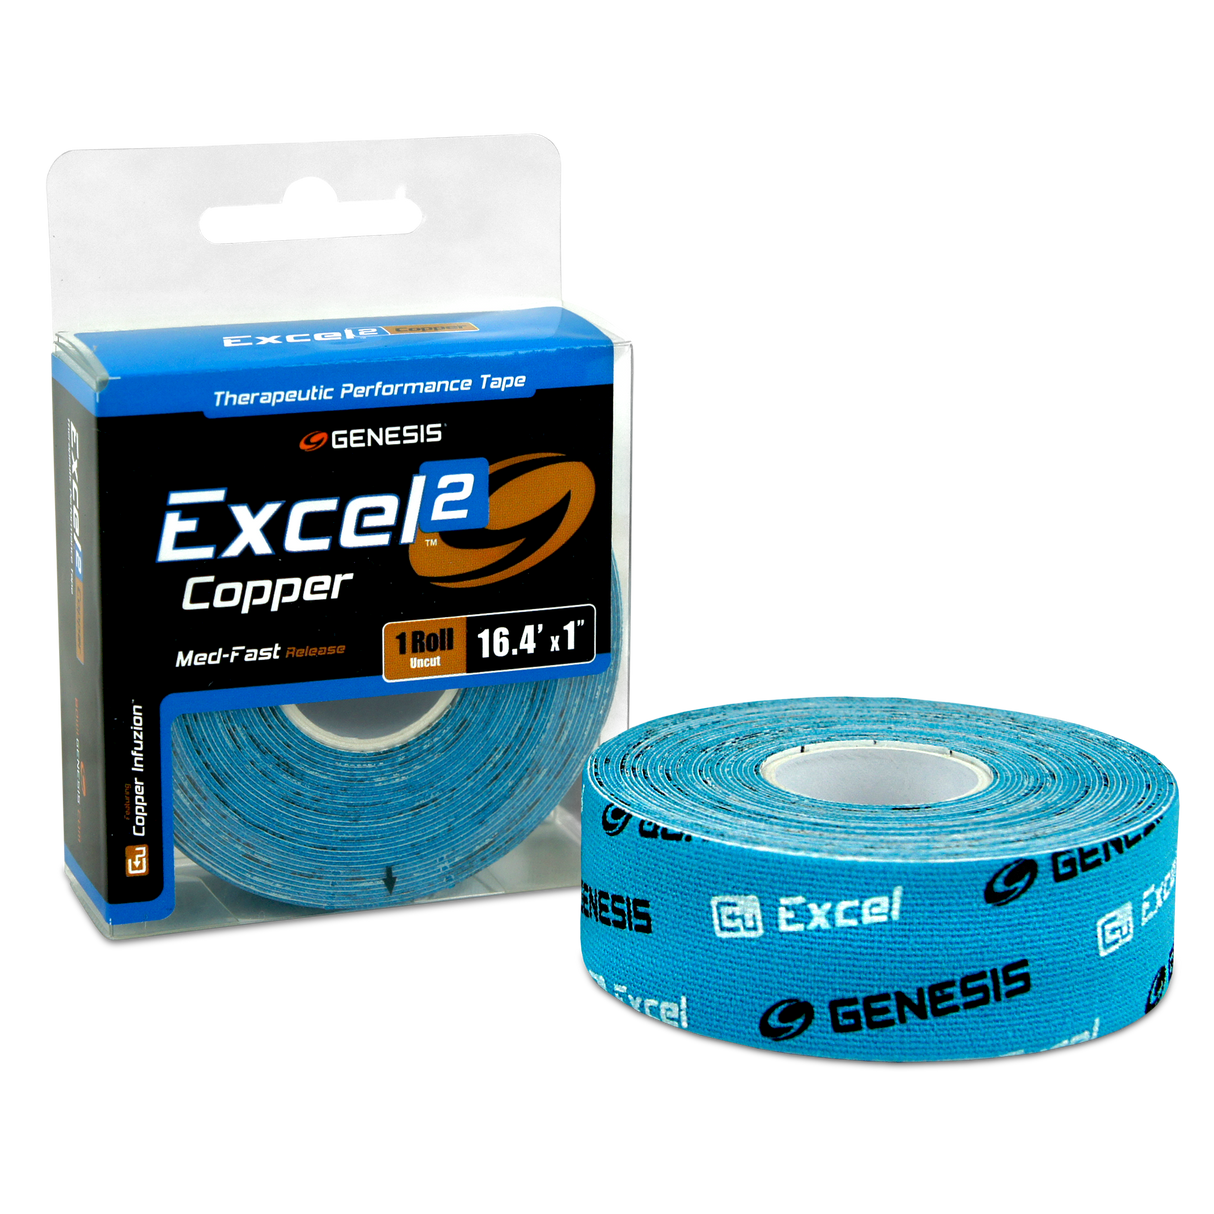 Genesis Excel Copper 3 Performance Tape Blue Roll